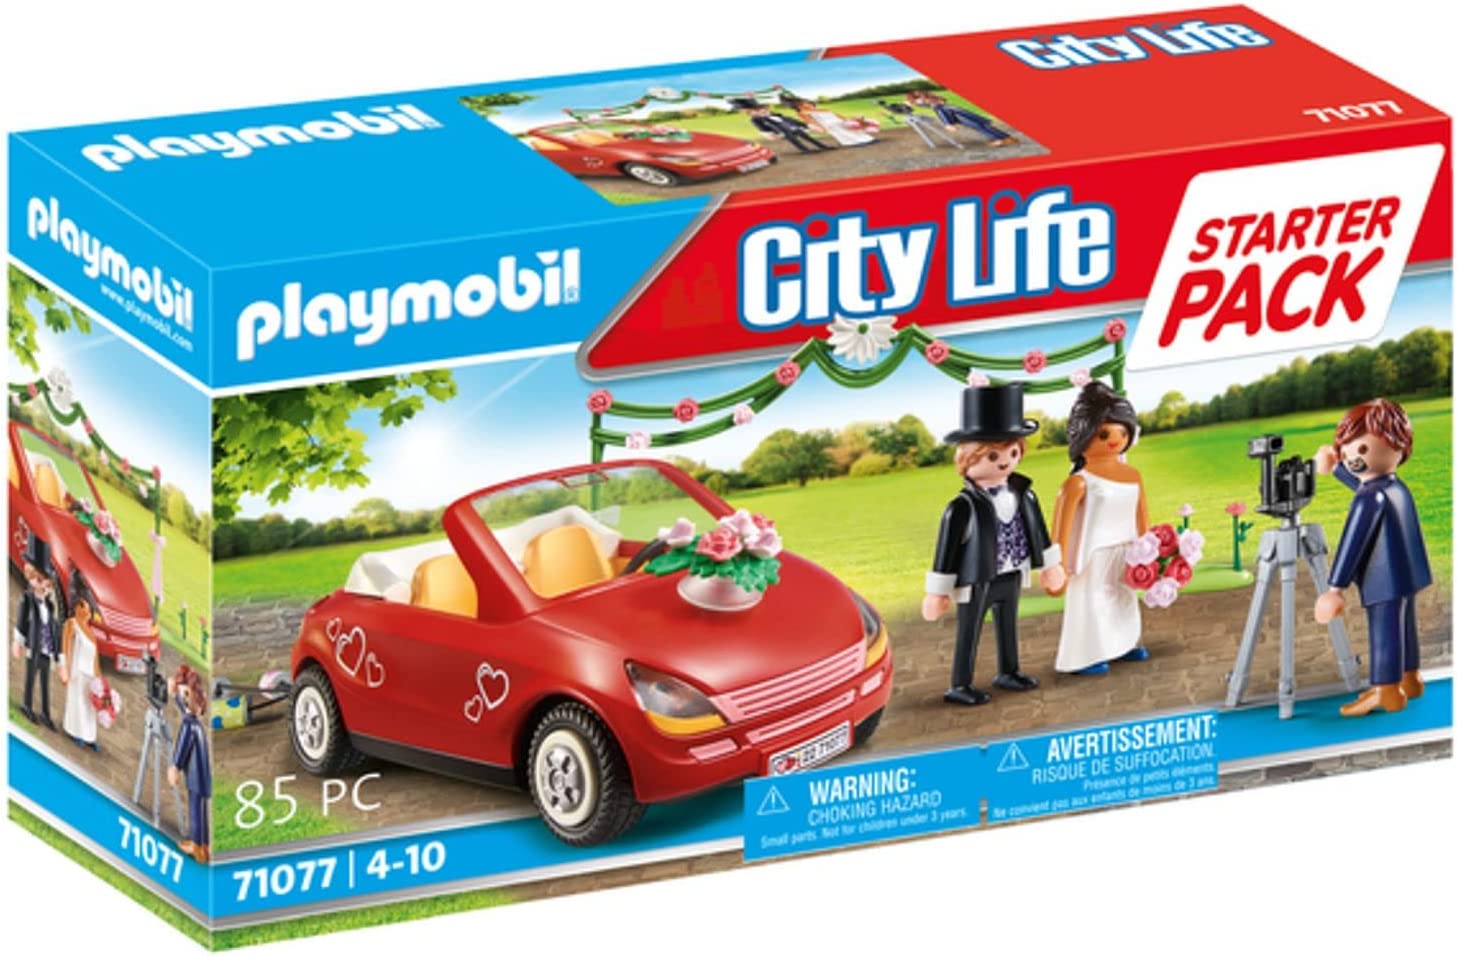 PLAYMOBIL City Life 71077 Wedding Starter Pack with Toy Car, First Toy for Children from 4 Years